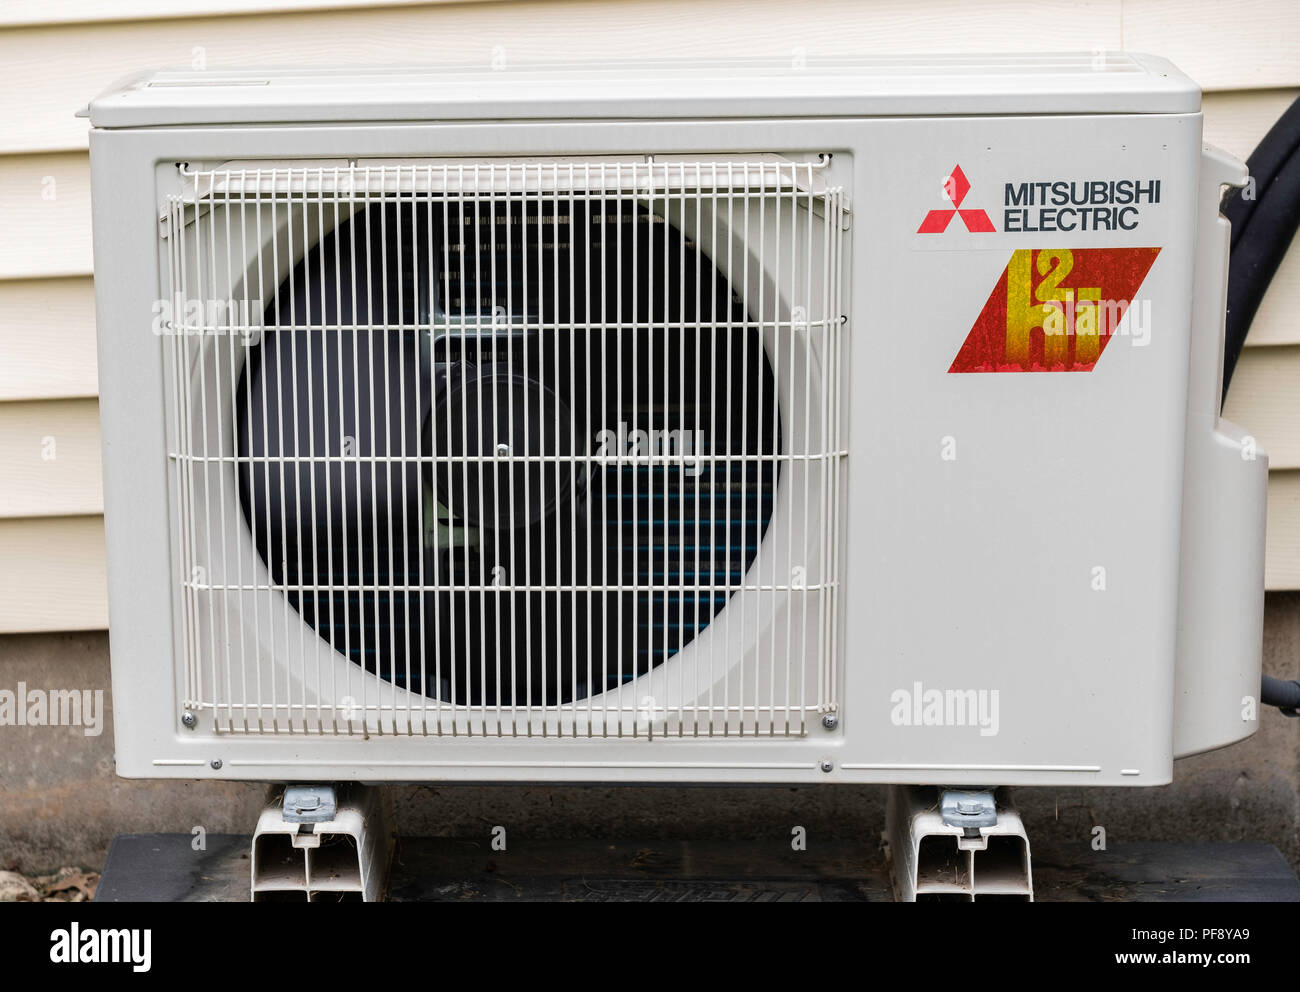 A Mitsubishi Electric 2 Hi Heating And Cooling Unit Suitable